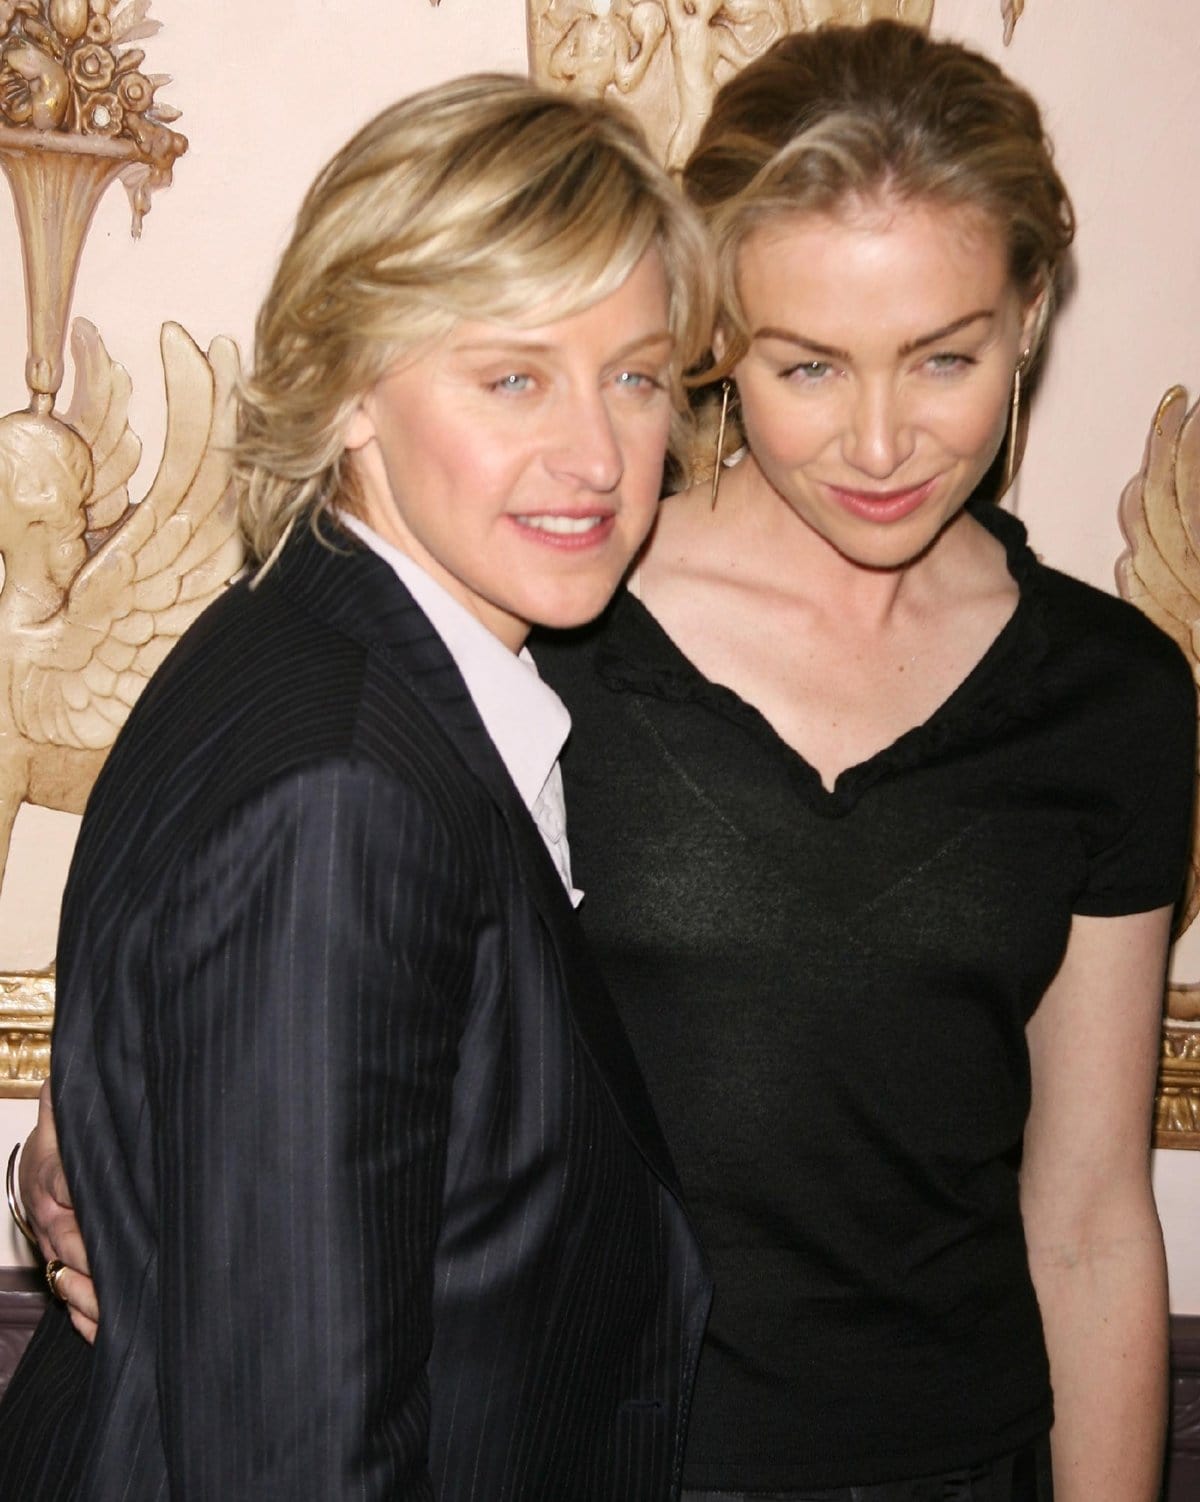 Ellen DeGeneres and Portia de Rossi first met at a party in 2000 and started dating in 2004